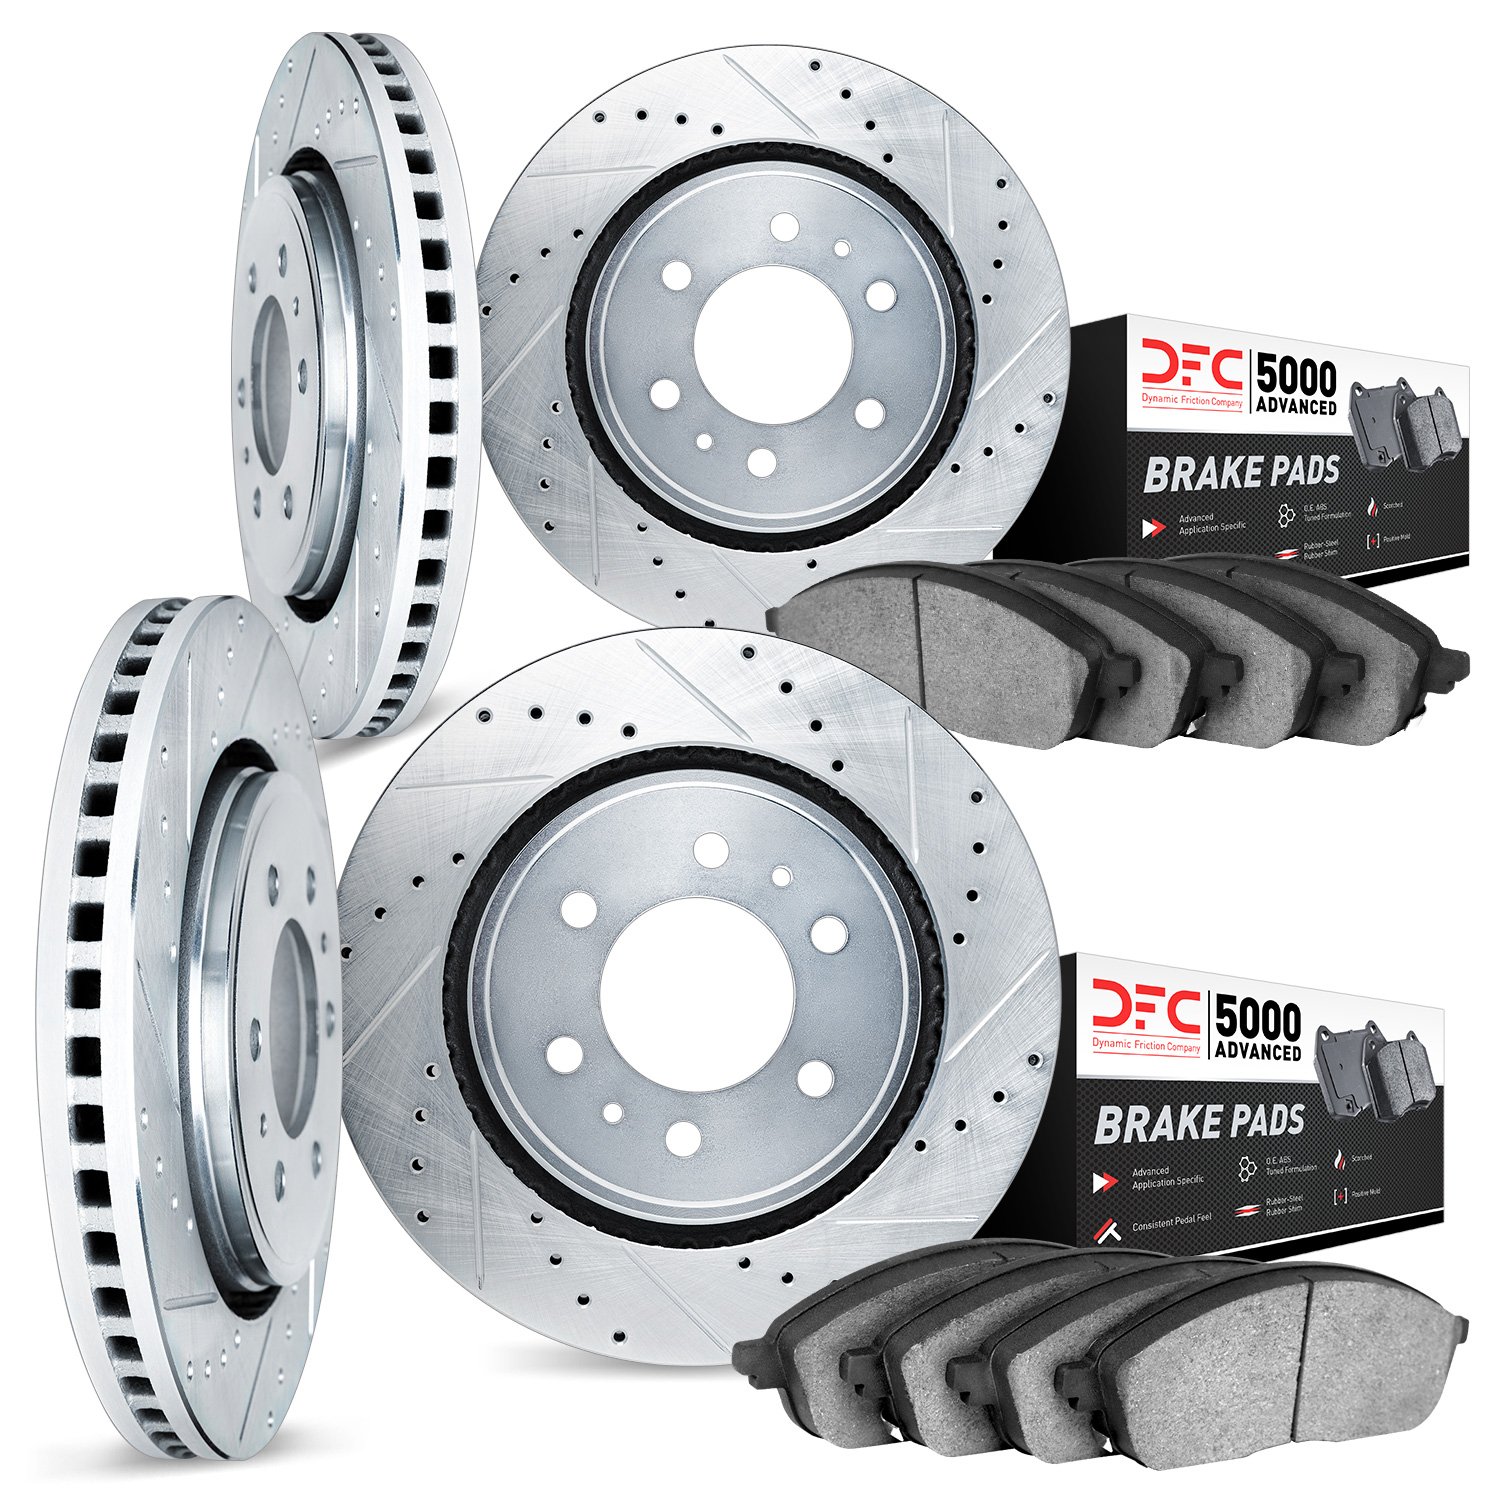 7504-46048 Drilled/Slotted Brake Rotors w/5000 Advanced Brake Pads Kit [Silver], 2017-2020 GM, Position: Front and Rear